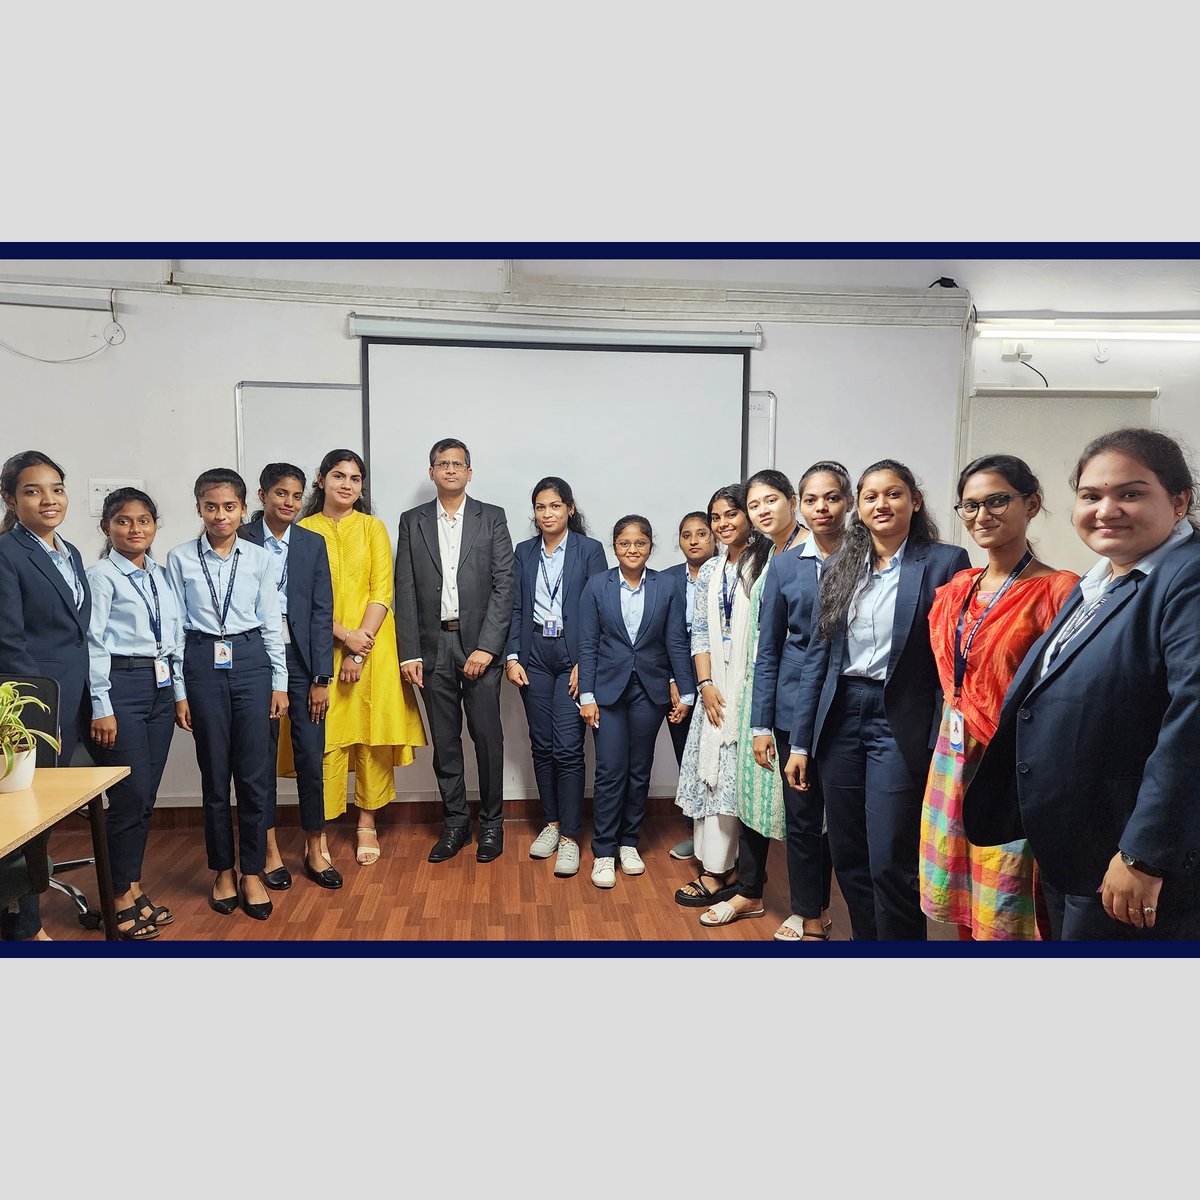 Our campus was buzzing with inspiration as we hosted a remarkable guest lecture by an industry insider Mr. B.V. Pavan Kumar who is a Solution Delivery Head at Cargill. His insights ignited a fire of motivation in our college students.

#GuestLecture #IndustryInsider #WBSCollege